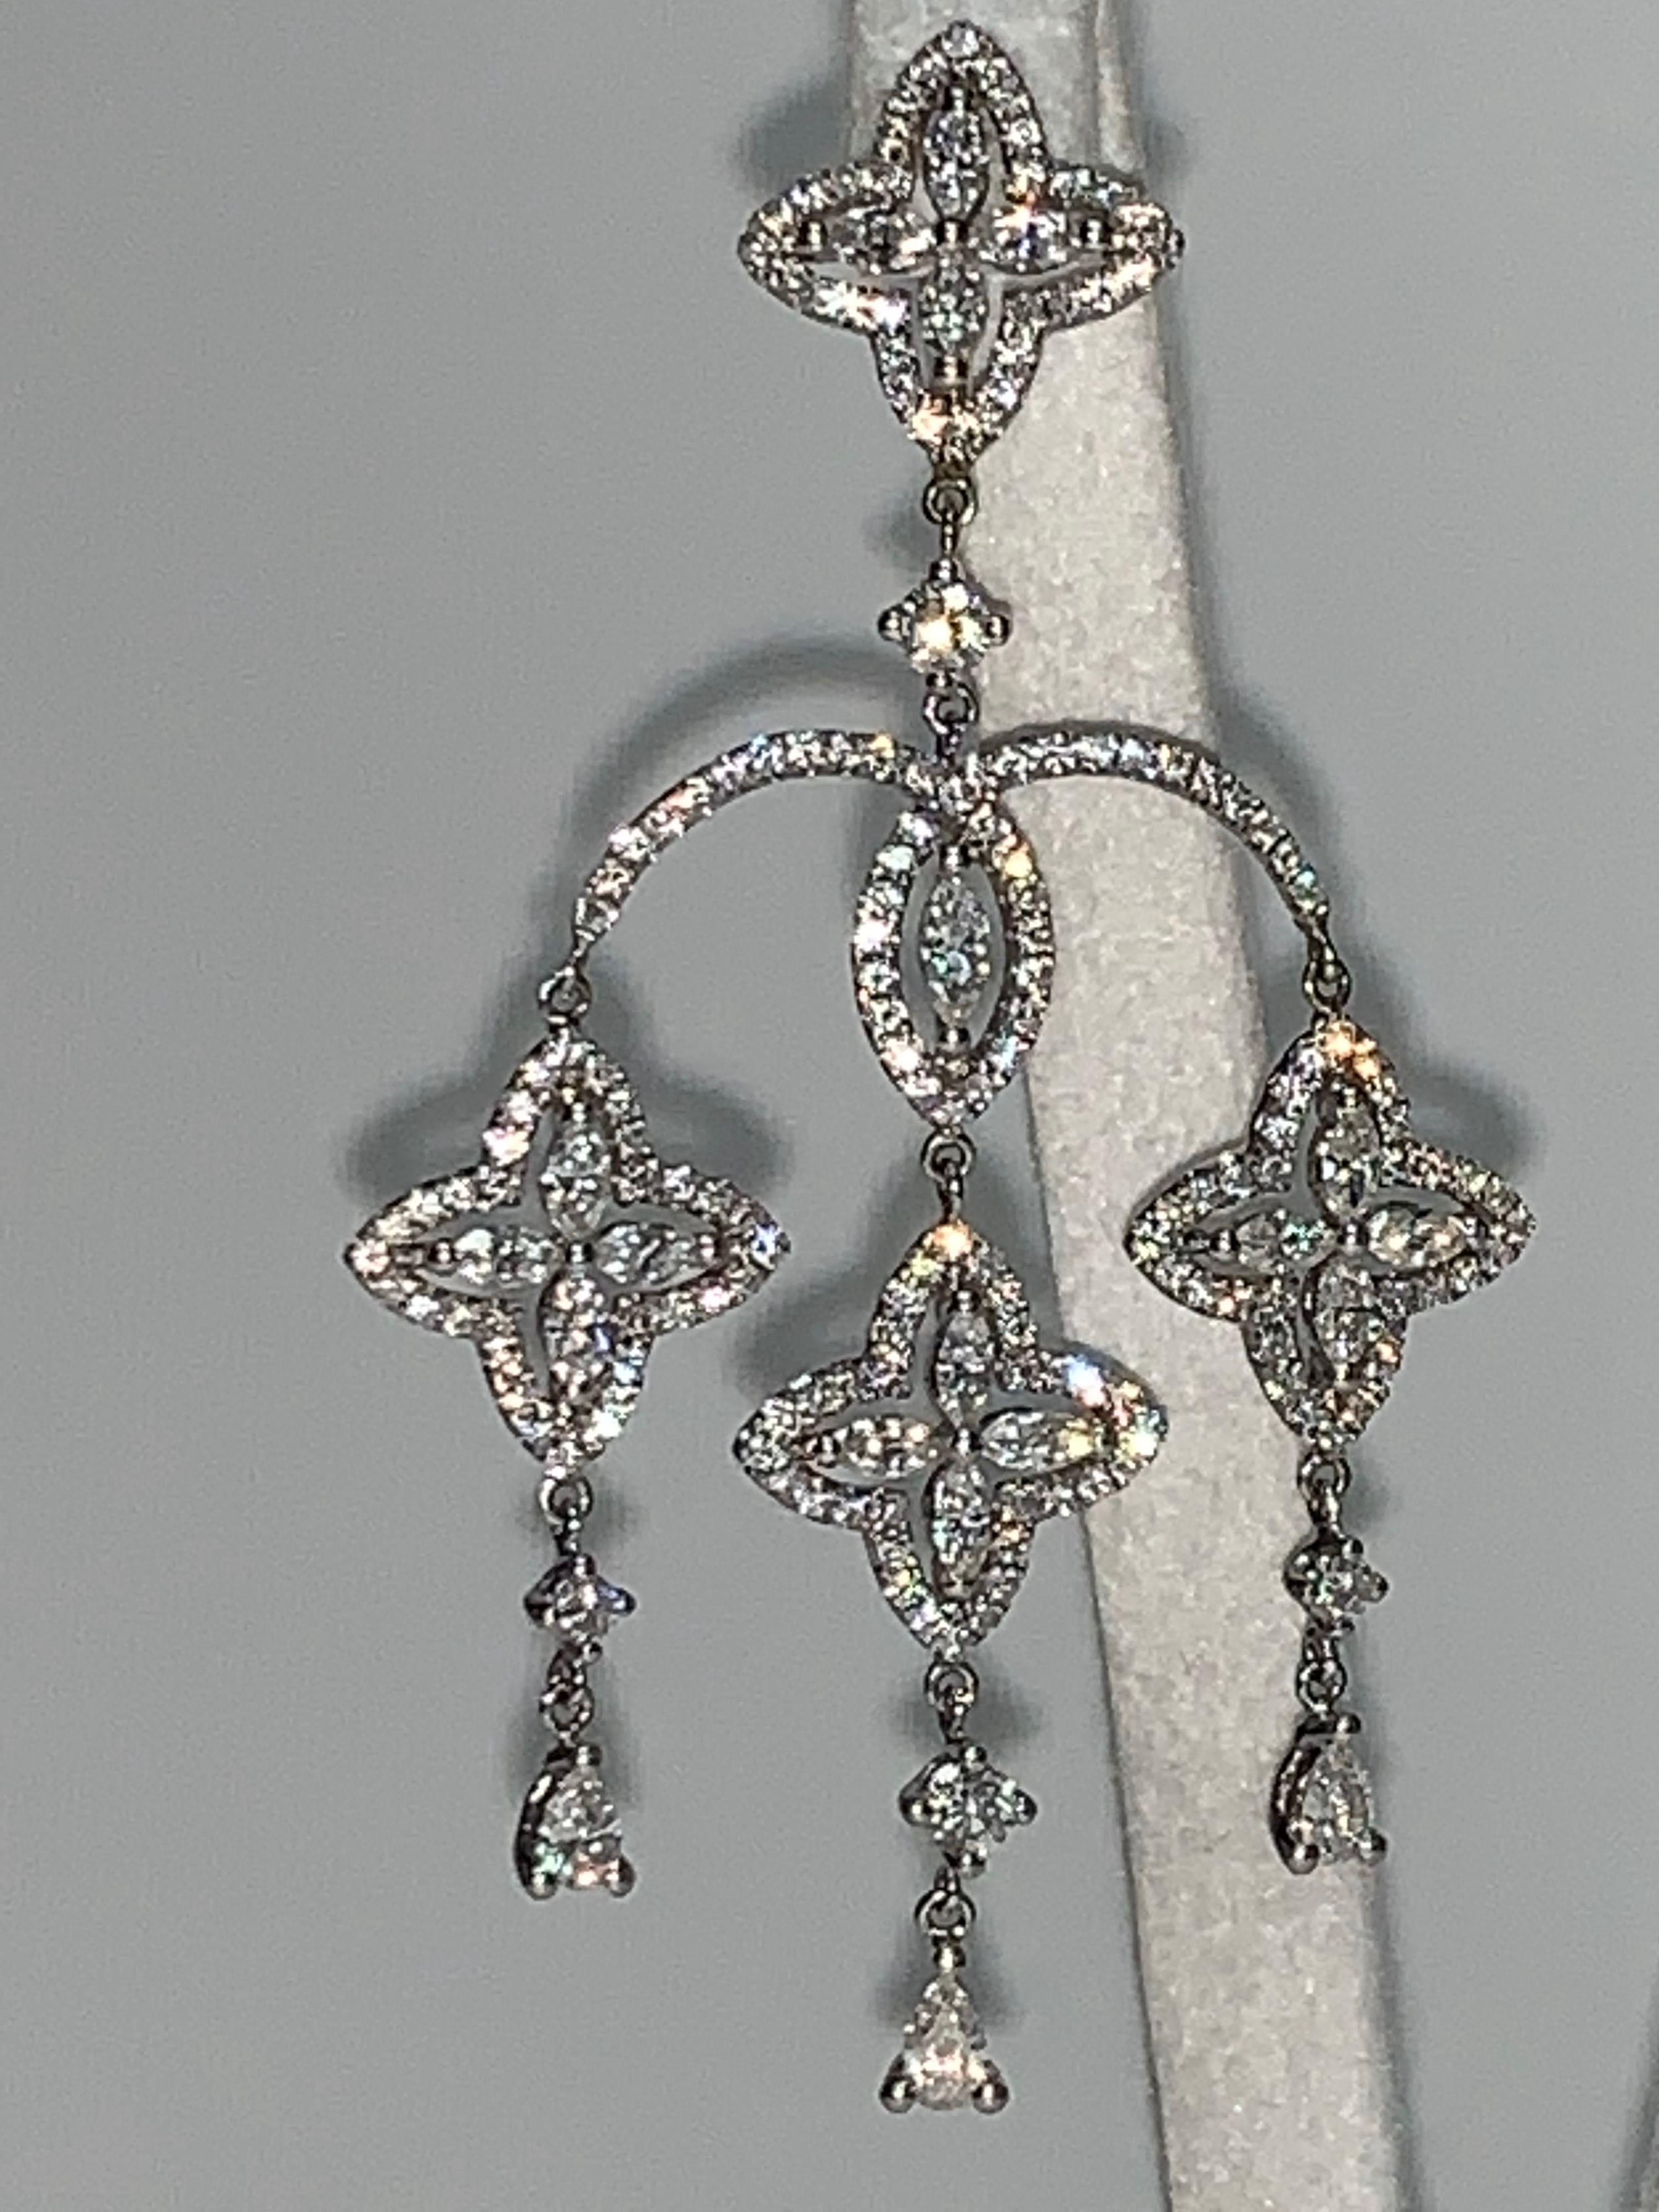 White Diamond, White Gold Earrings. 

Featuring an exquisite pair of White Diamond Earrings with a total weight of 2.87 carats: Pear Shape Diamonds; accented with Round Brilliant Cut Diamonds; set in 18K White Gold.

Diamonds, F in color and VS2